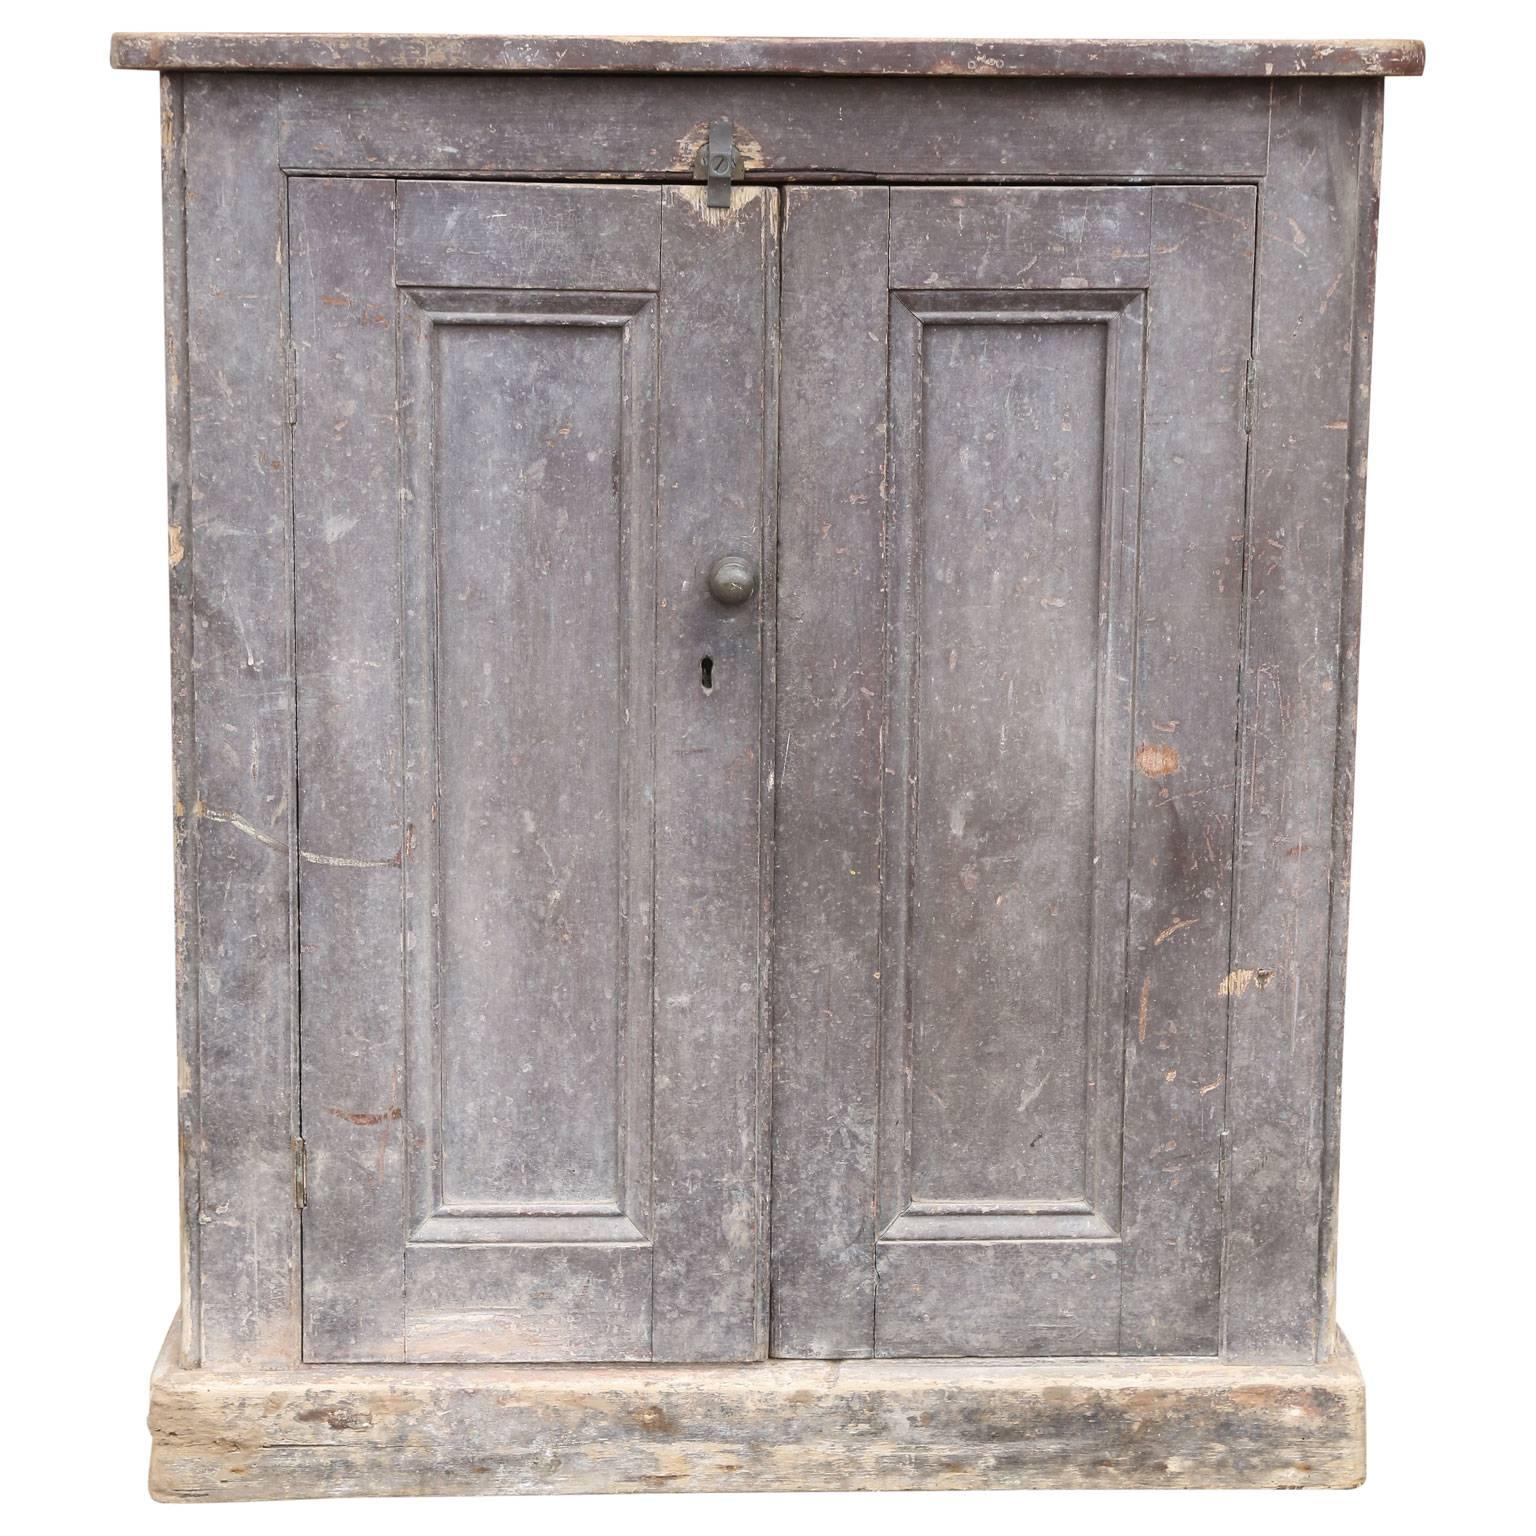 Painted two-door cabinet (cupboard) has an original oxblood painted finish that's accrued a gorgeous grayish patina over the decades. The cabinet's construction is predominately mortise and tenon in pine, sides are paneled and its interior holds a